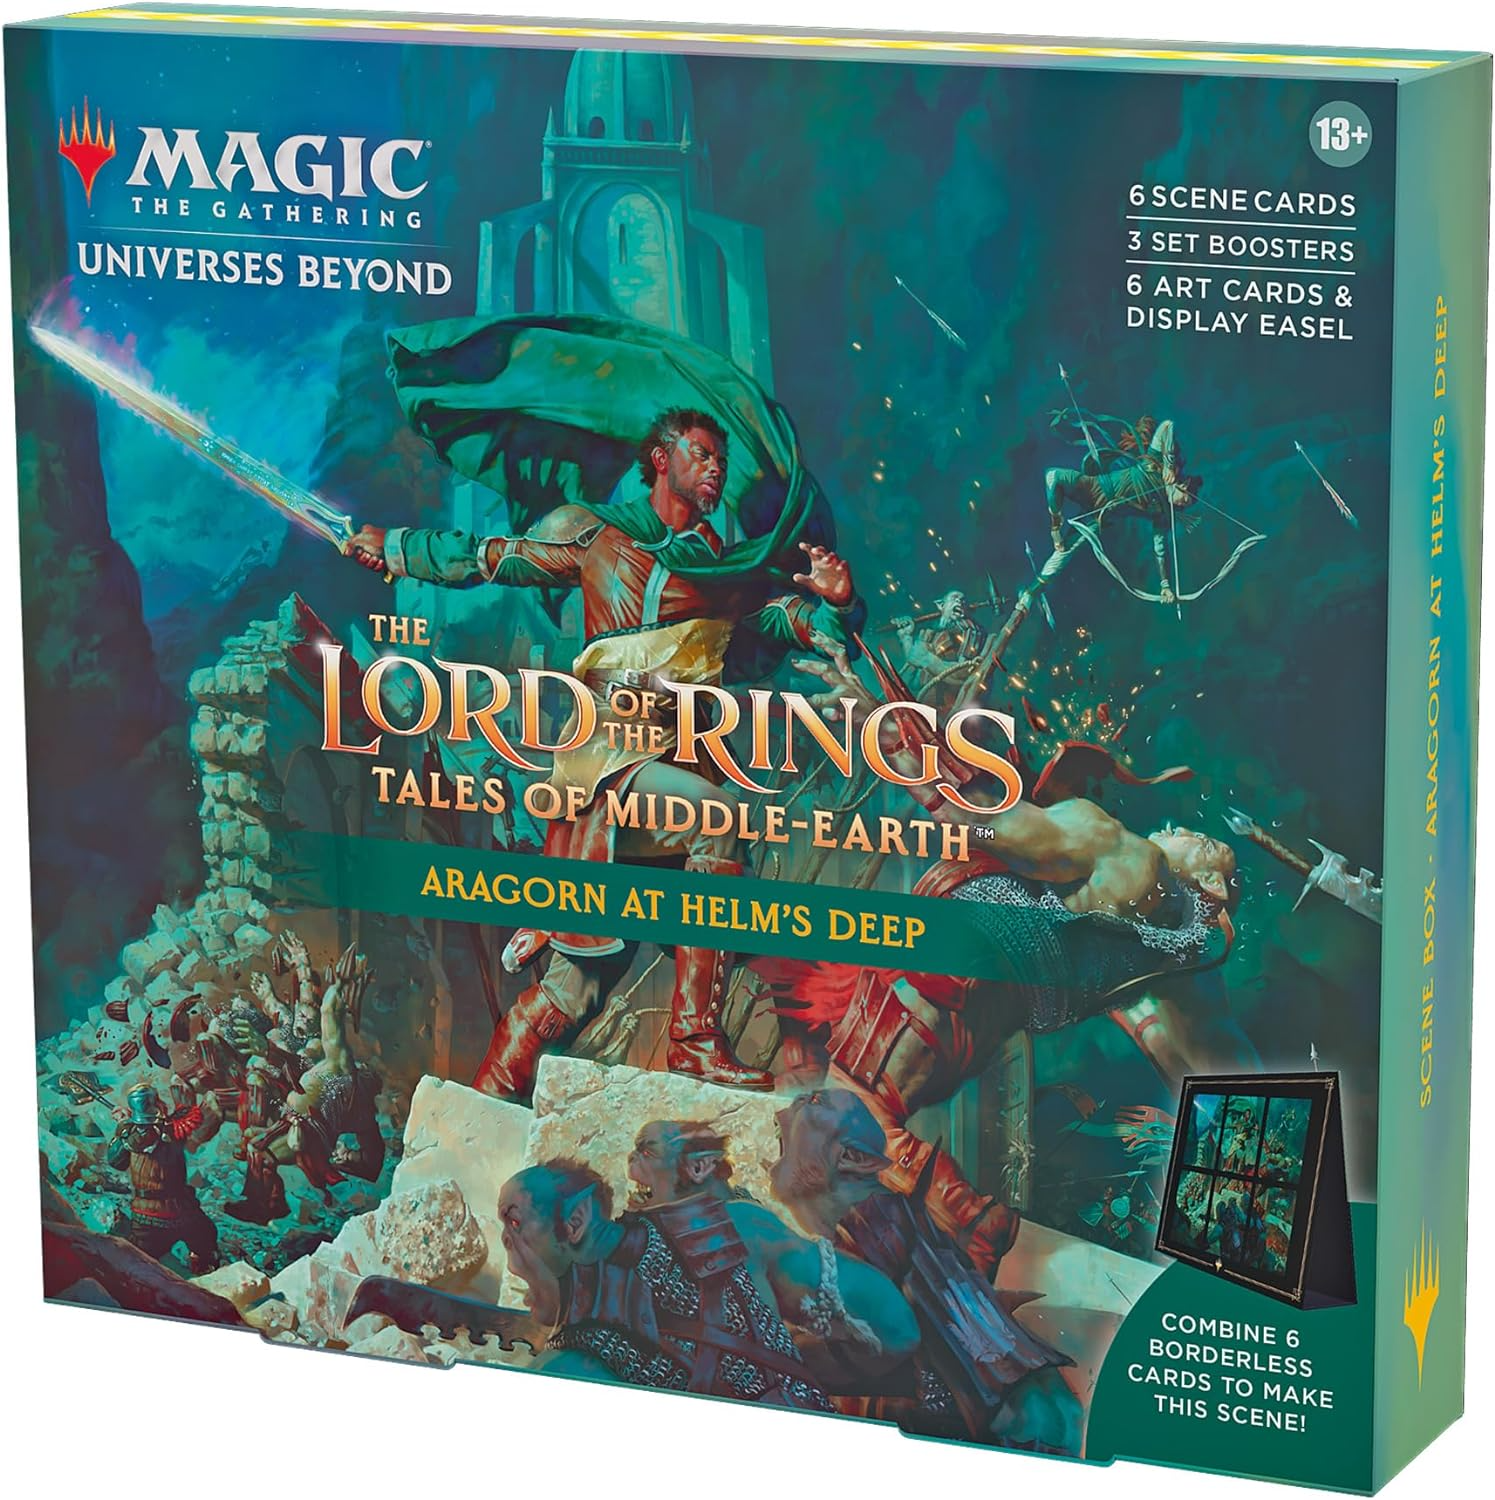 The Lord of the Rings: Tales of Middle-Earth Scene Box (Aragorn at Helm's Deep) | Yard's Games Ltd